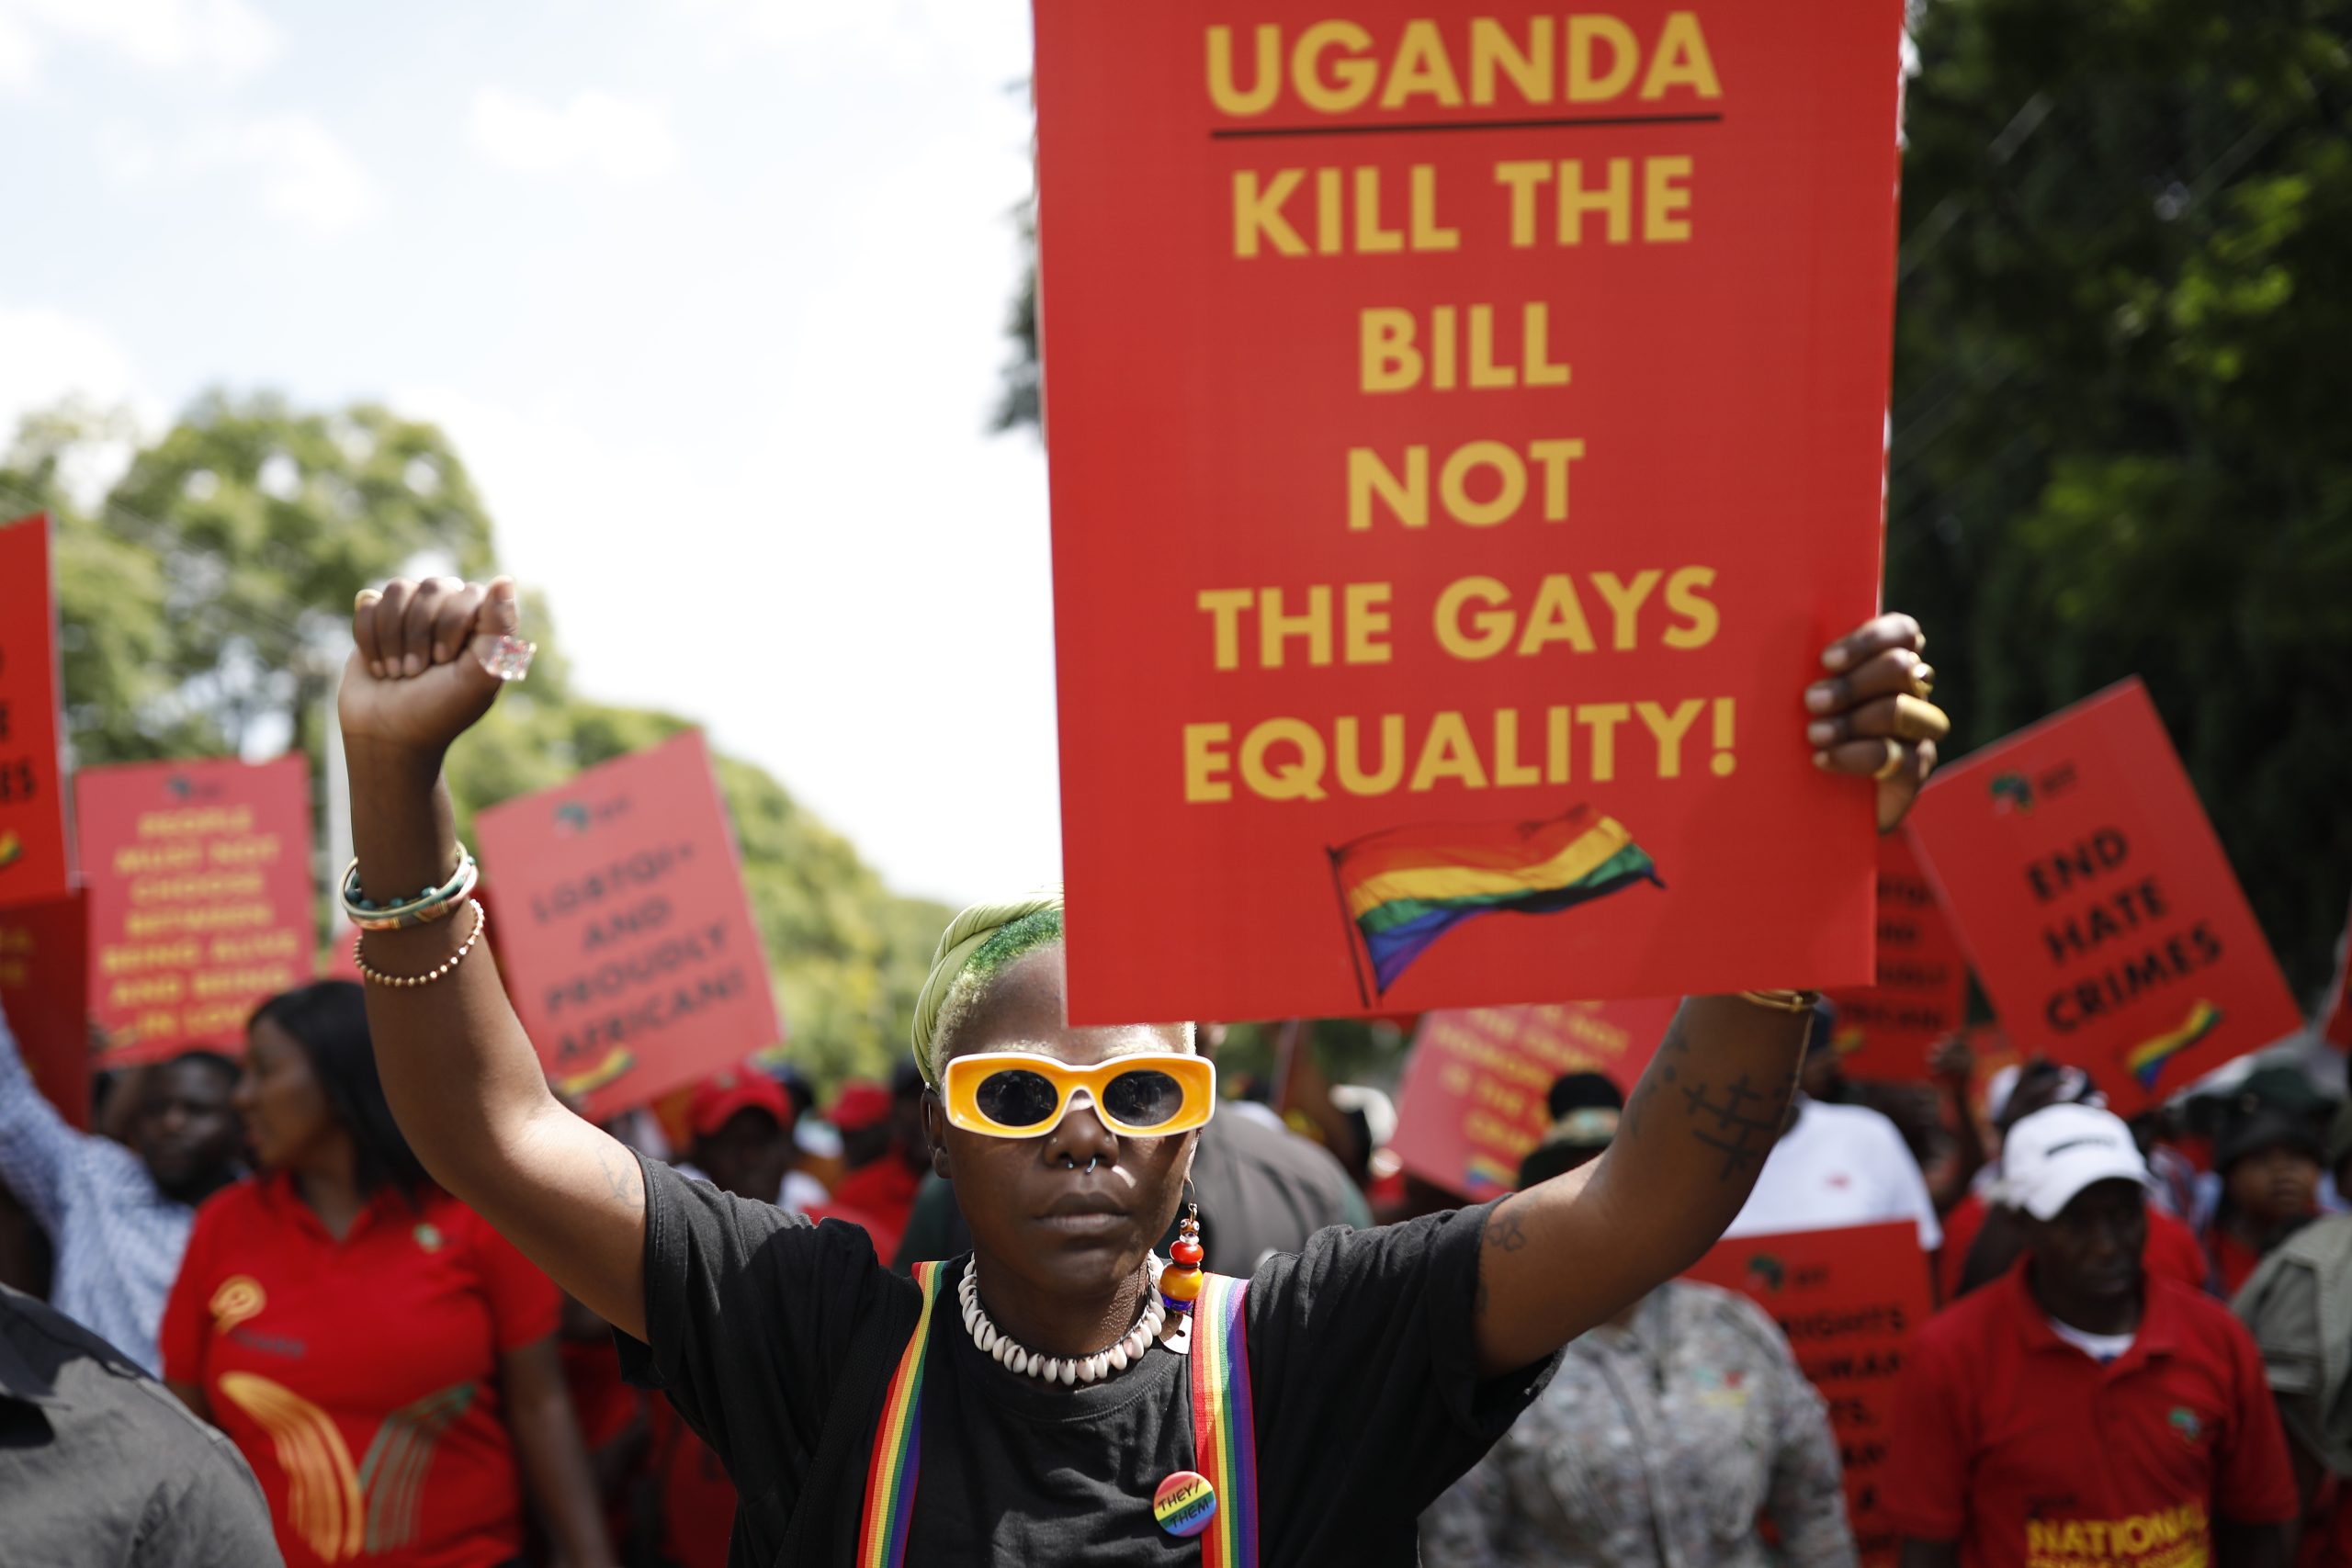 Anti-LGBTQ disinformation surges online in East Africa